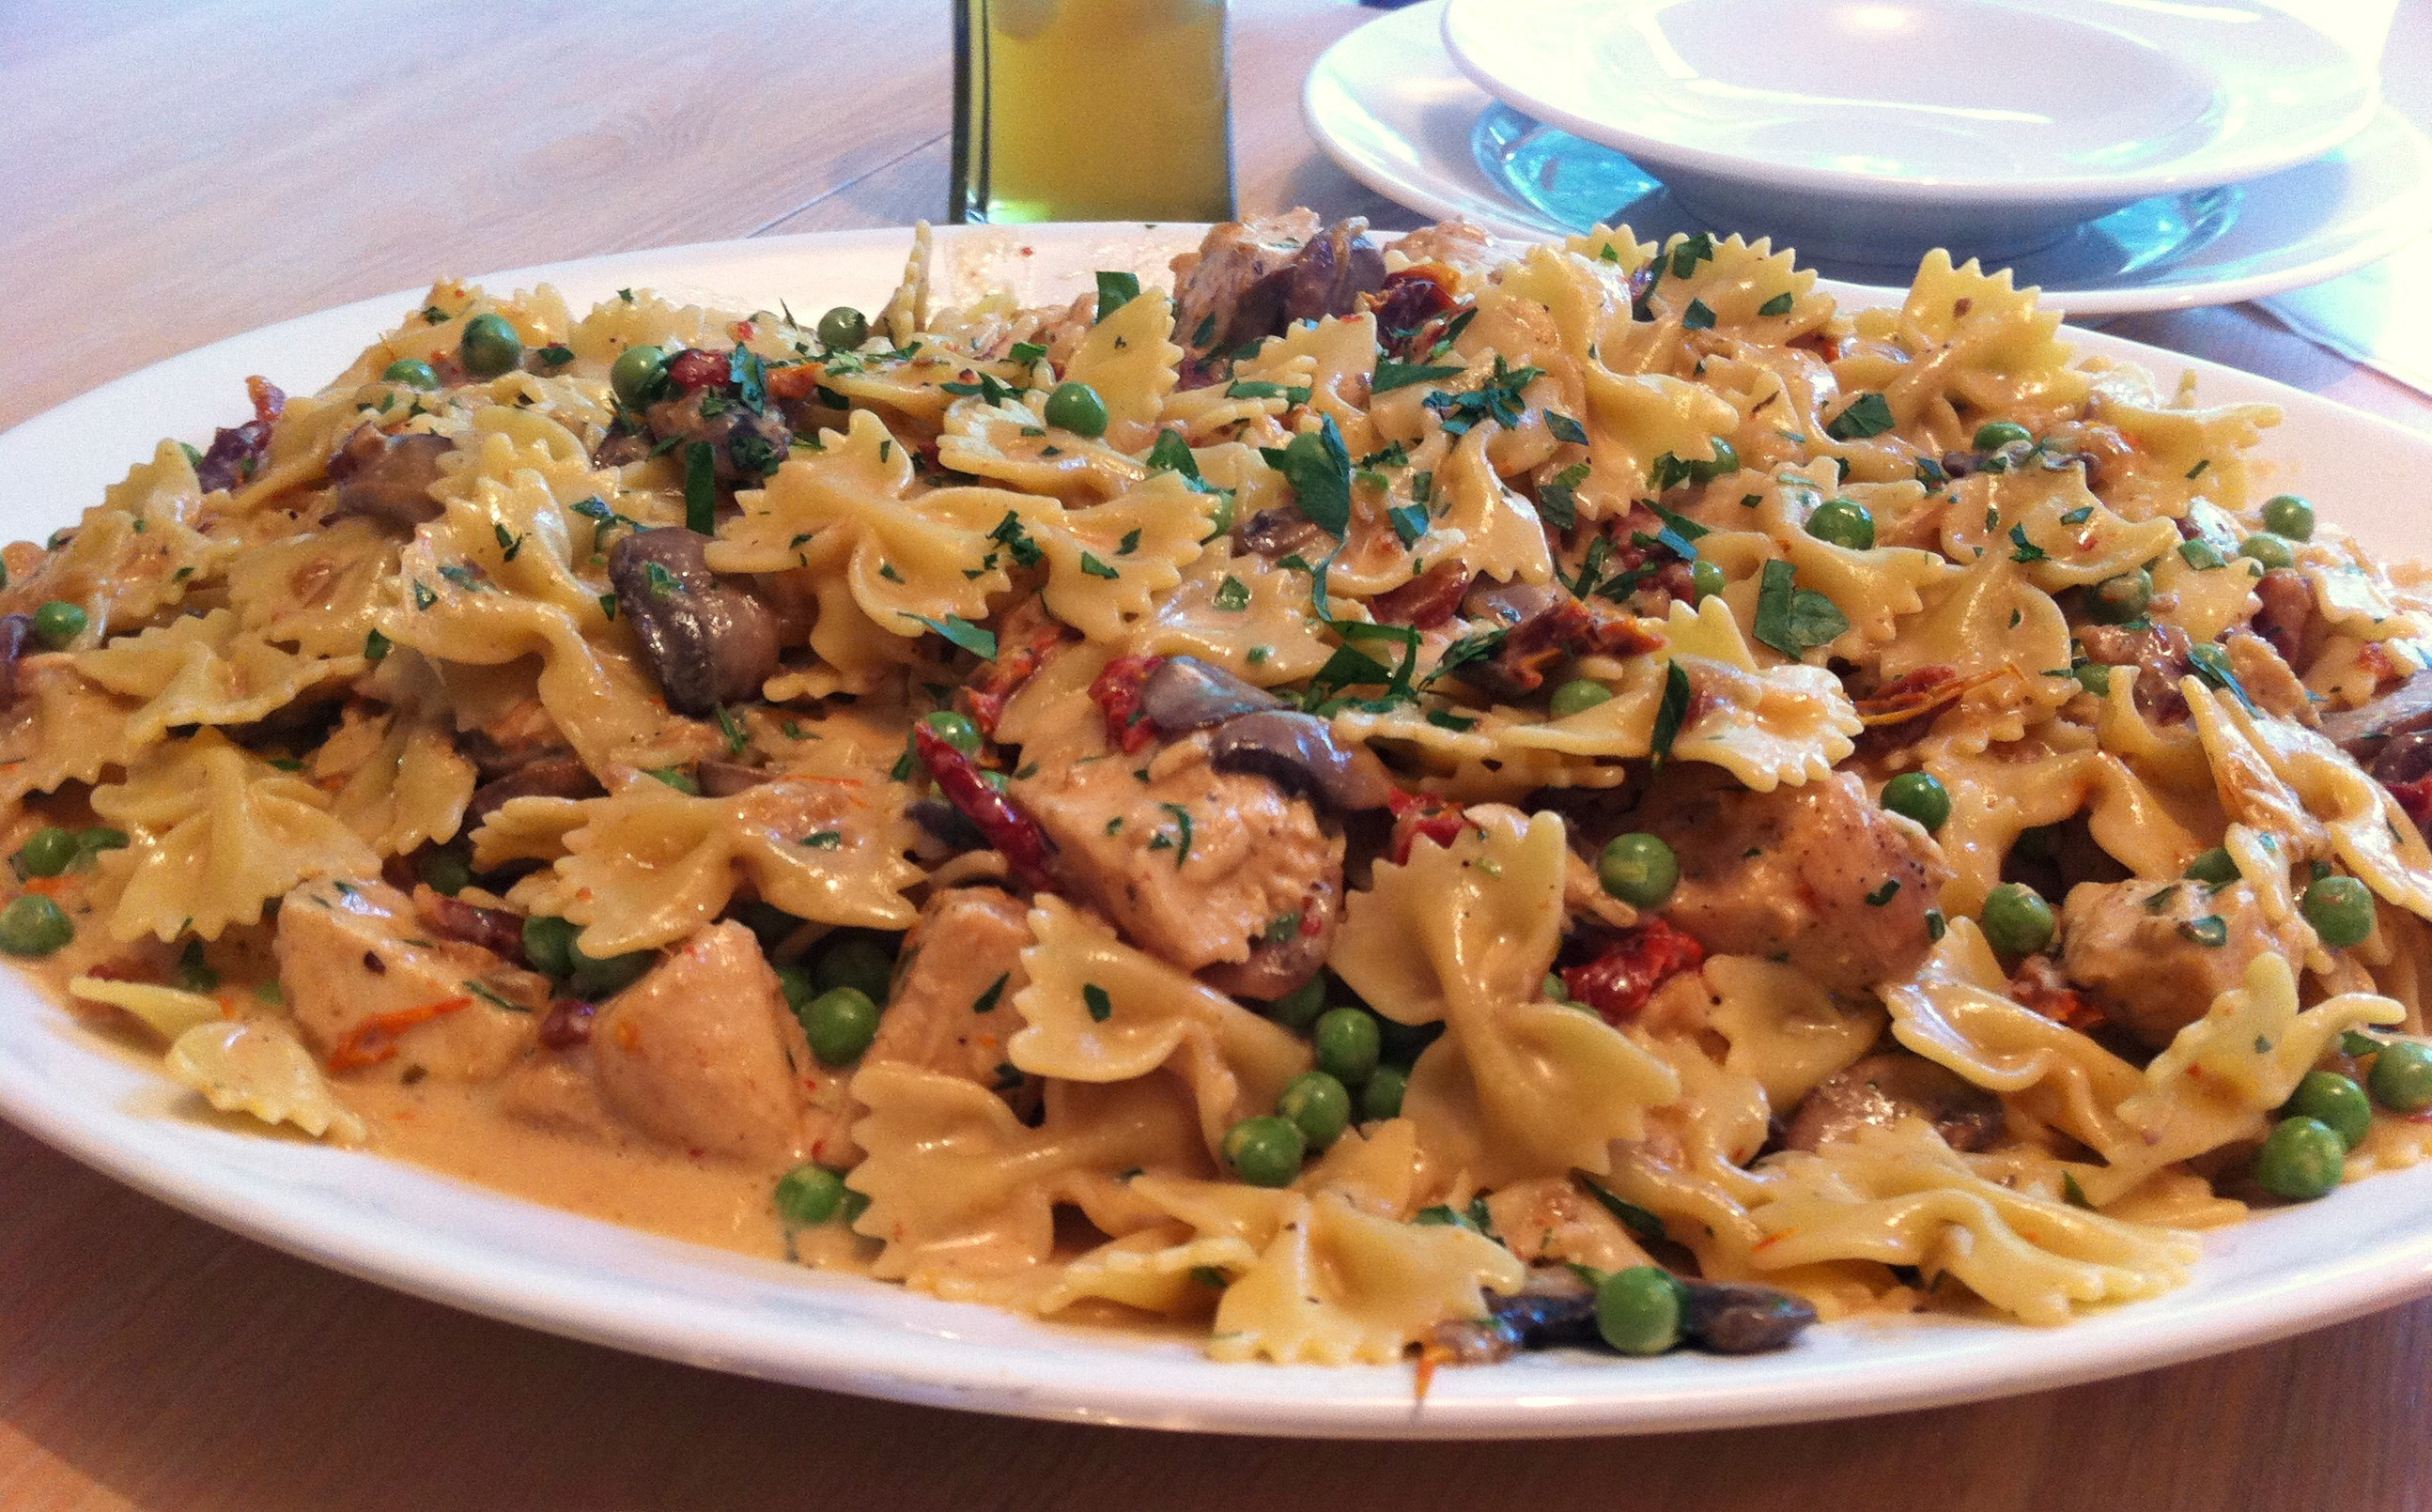 Cheesecake Factory Farfalle With Chicken And Roasted Garlic
 Chicken and Farfalle Pasta in a Roasted Garlic Cream Sauce